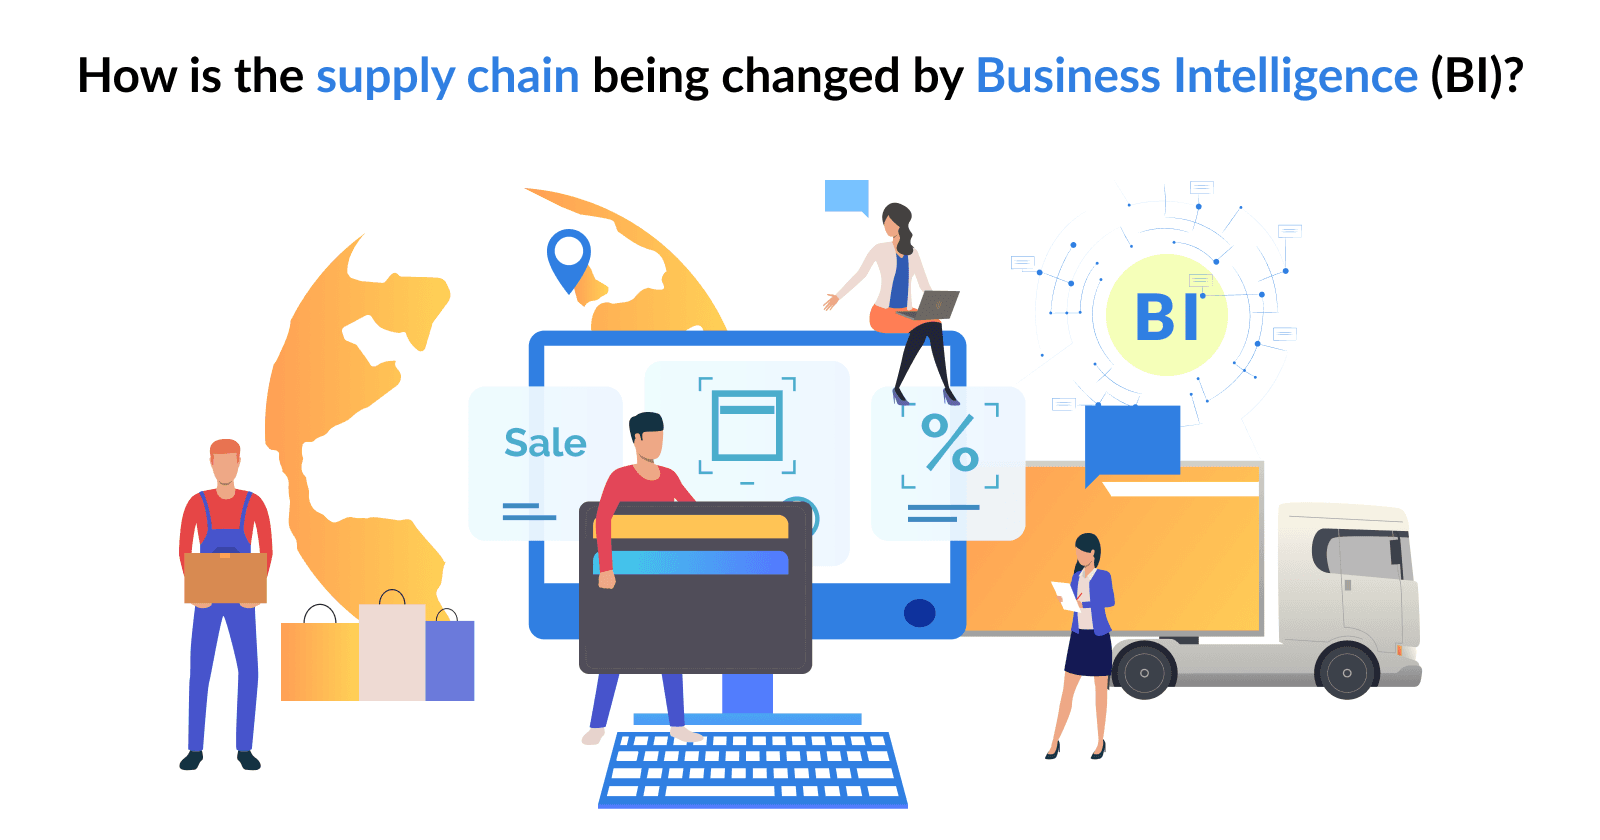 How is the supply chain being changed by Business Intelligence (BI)?